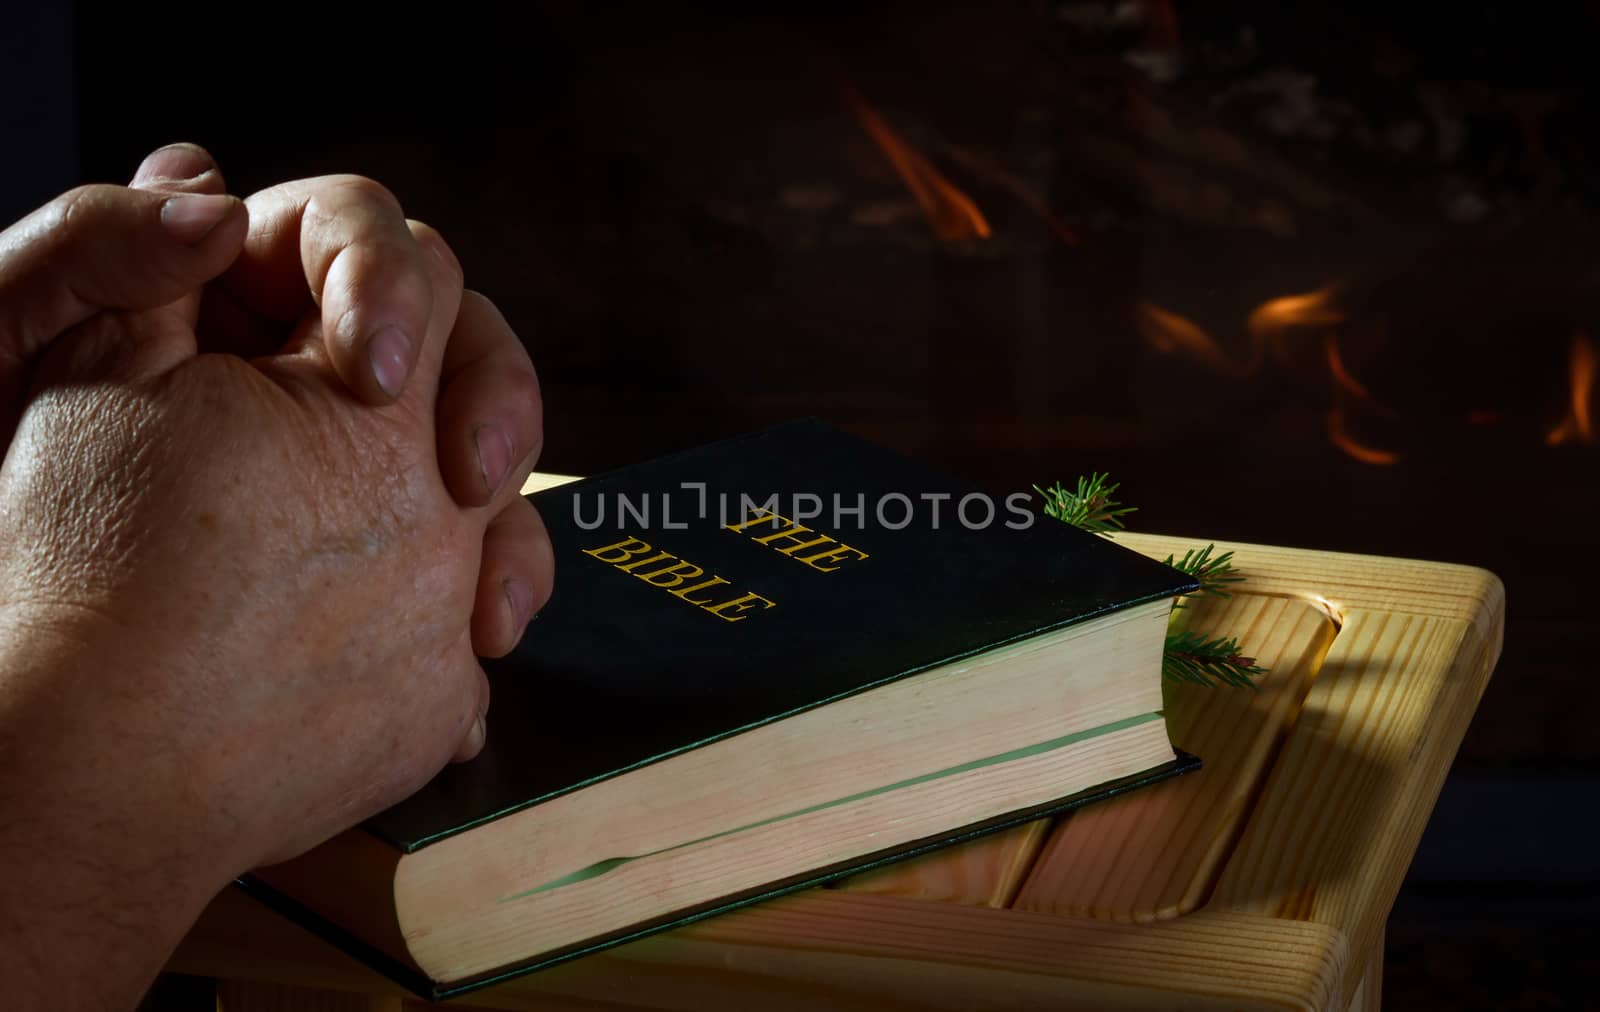 Hands of a man prying on fireplace background